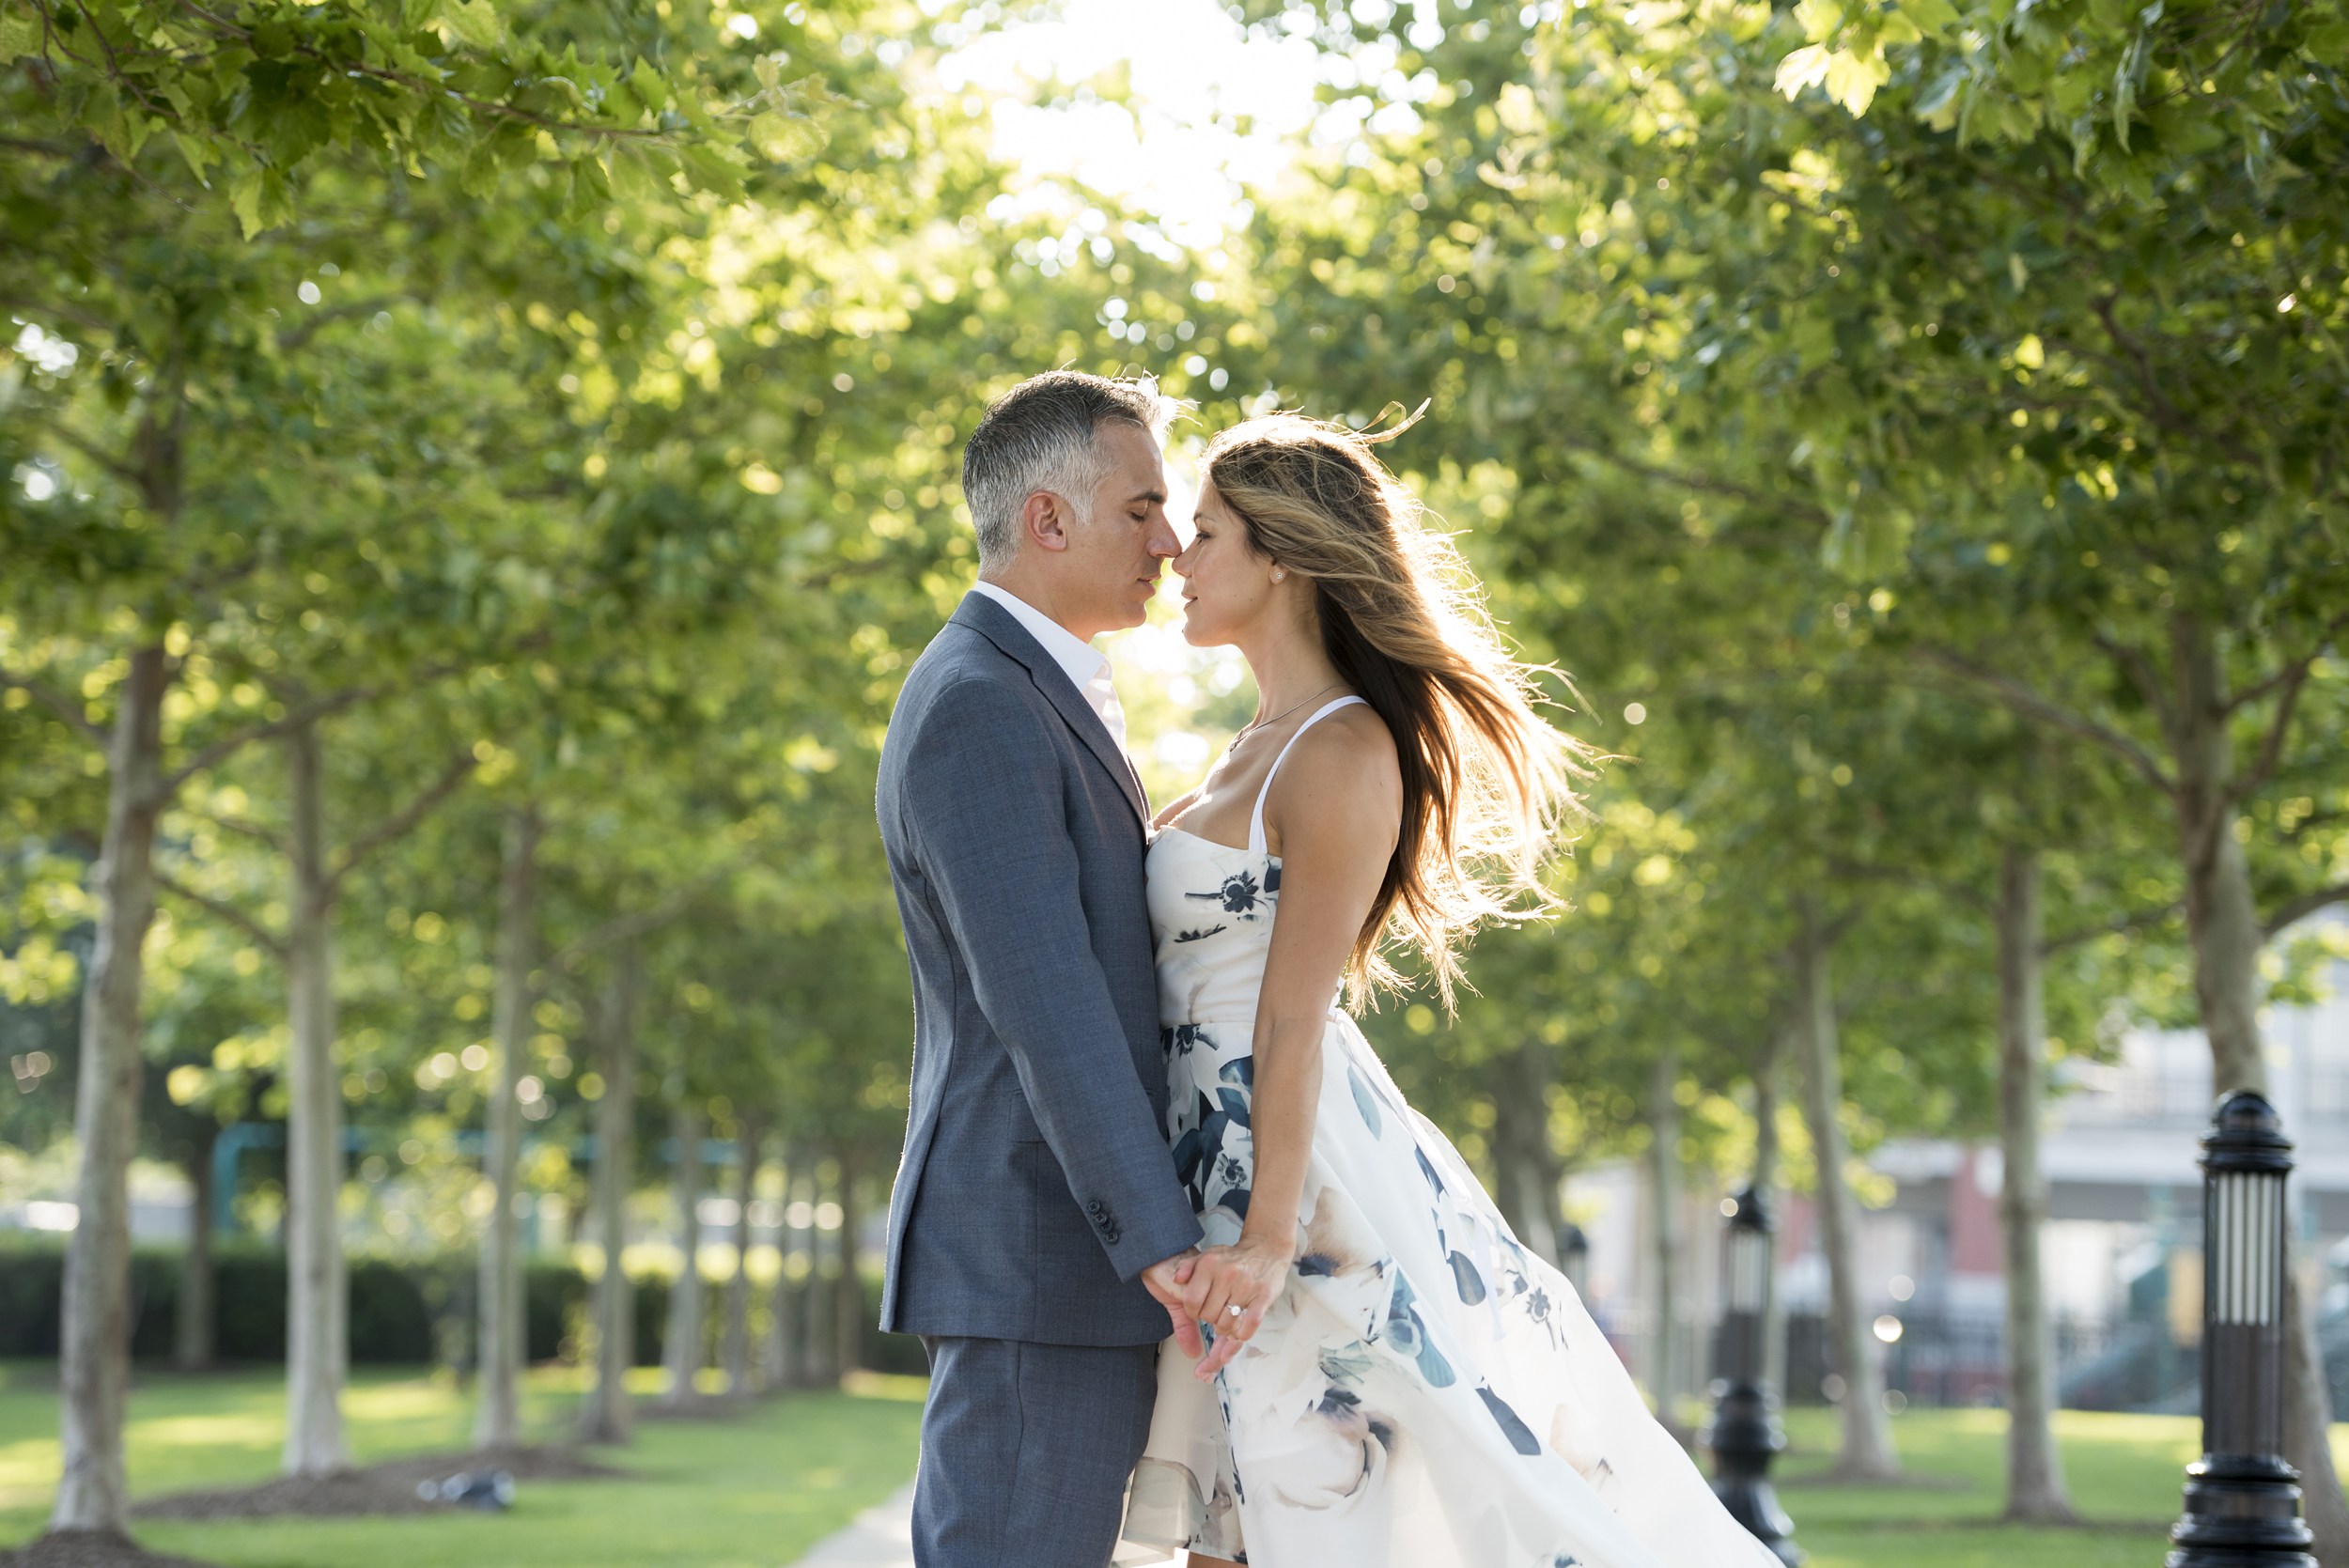 A man in a grey suit and a woman in a white floral dress are about to kiss while standing in a sunlit allee of trees in a photo by Studio A Images